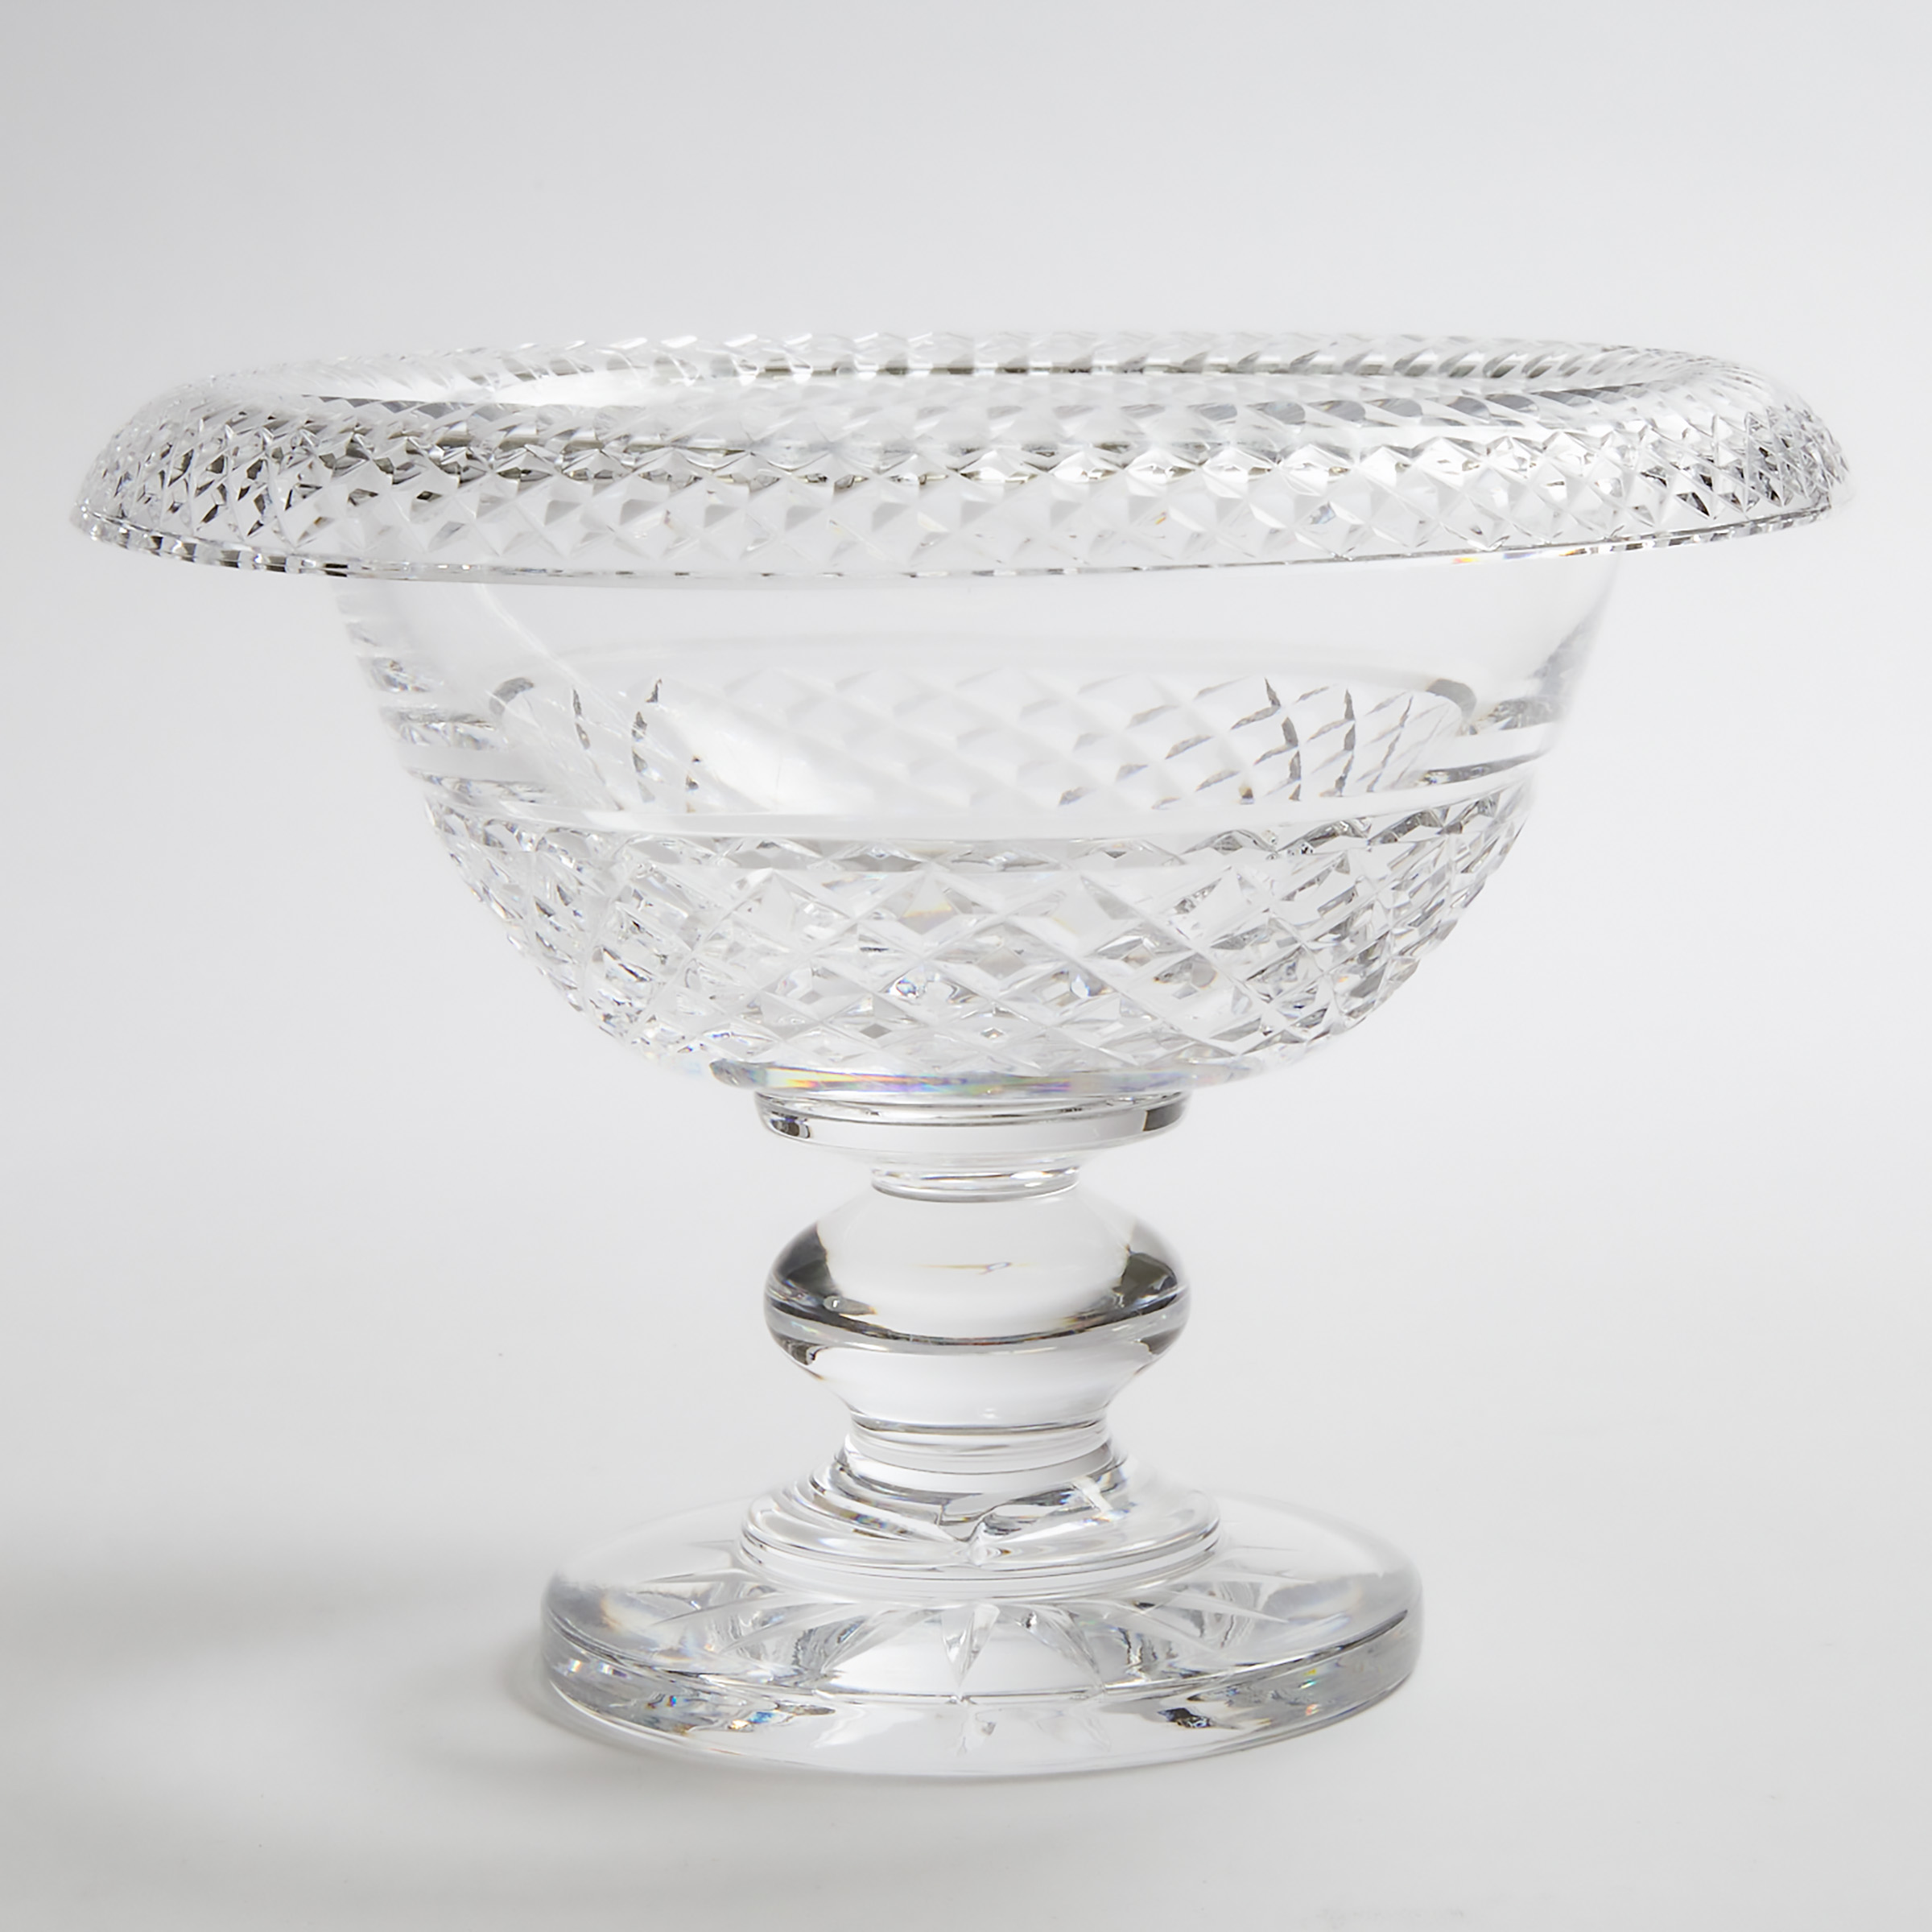 Waterford Cut Glass Pedestal-Footed Bowl, 20th century